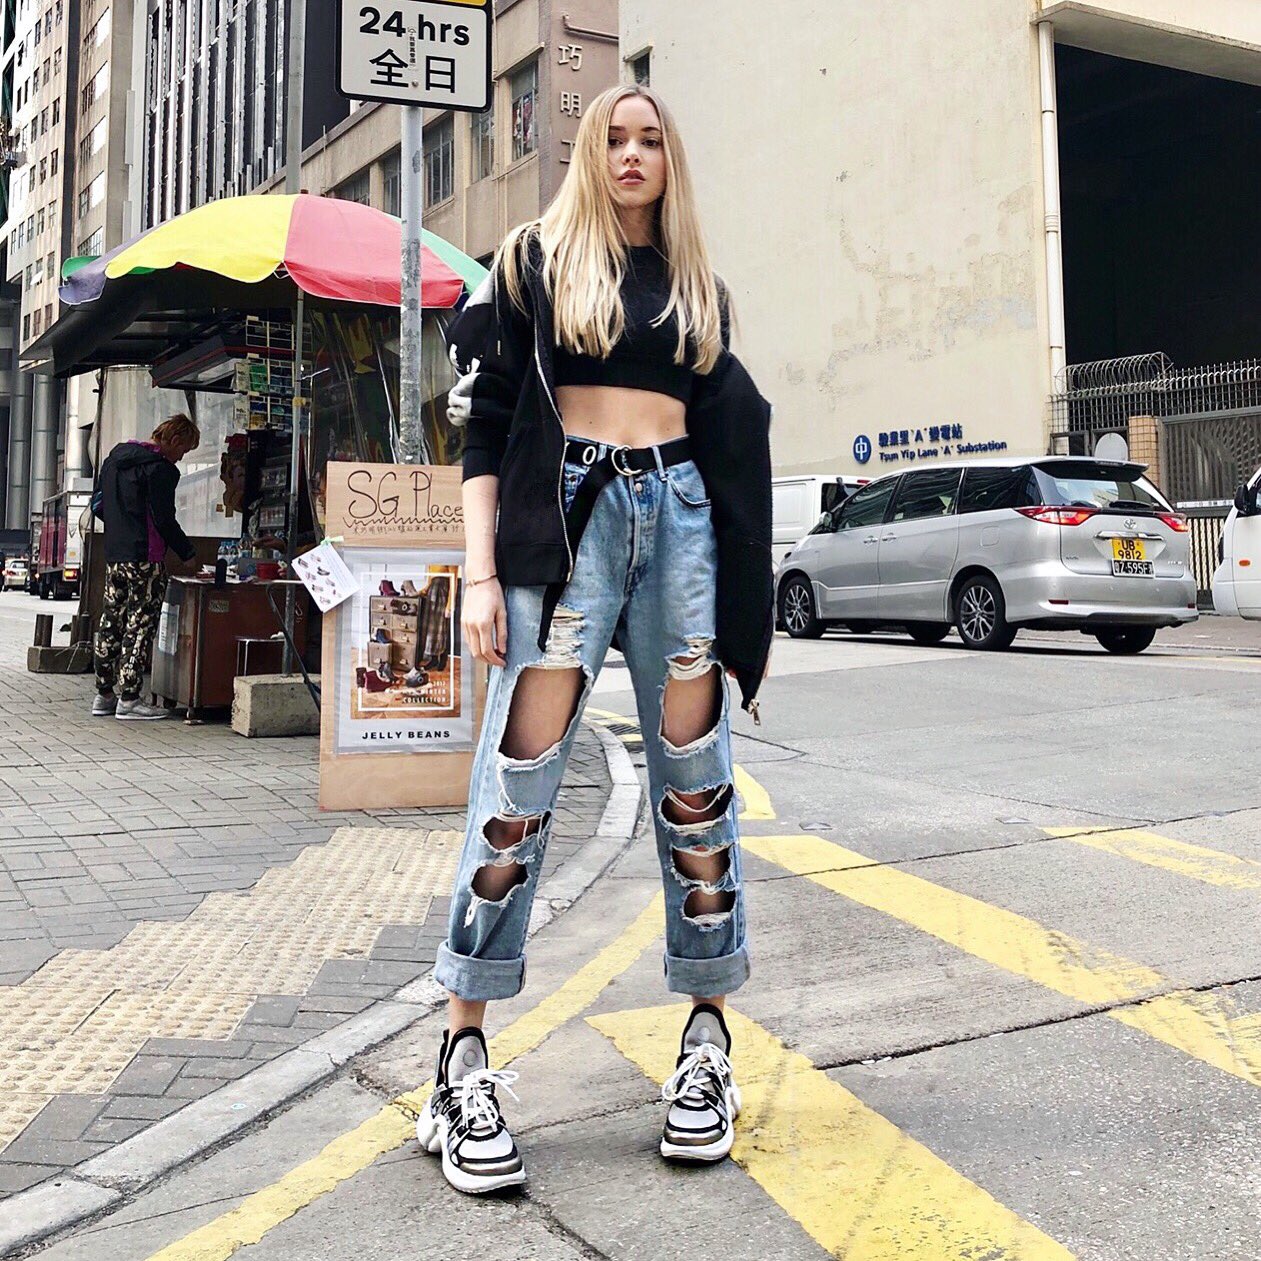 Taylor R on X: Shirt: Missguided Jeans: Thrifted Belt: Shibuya